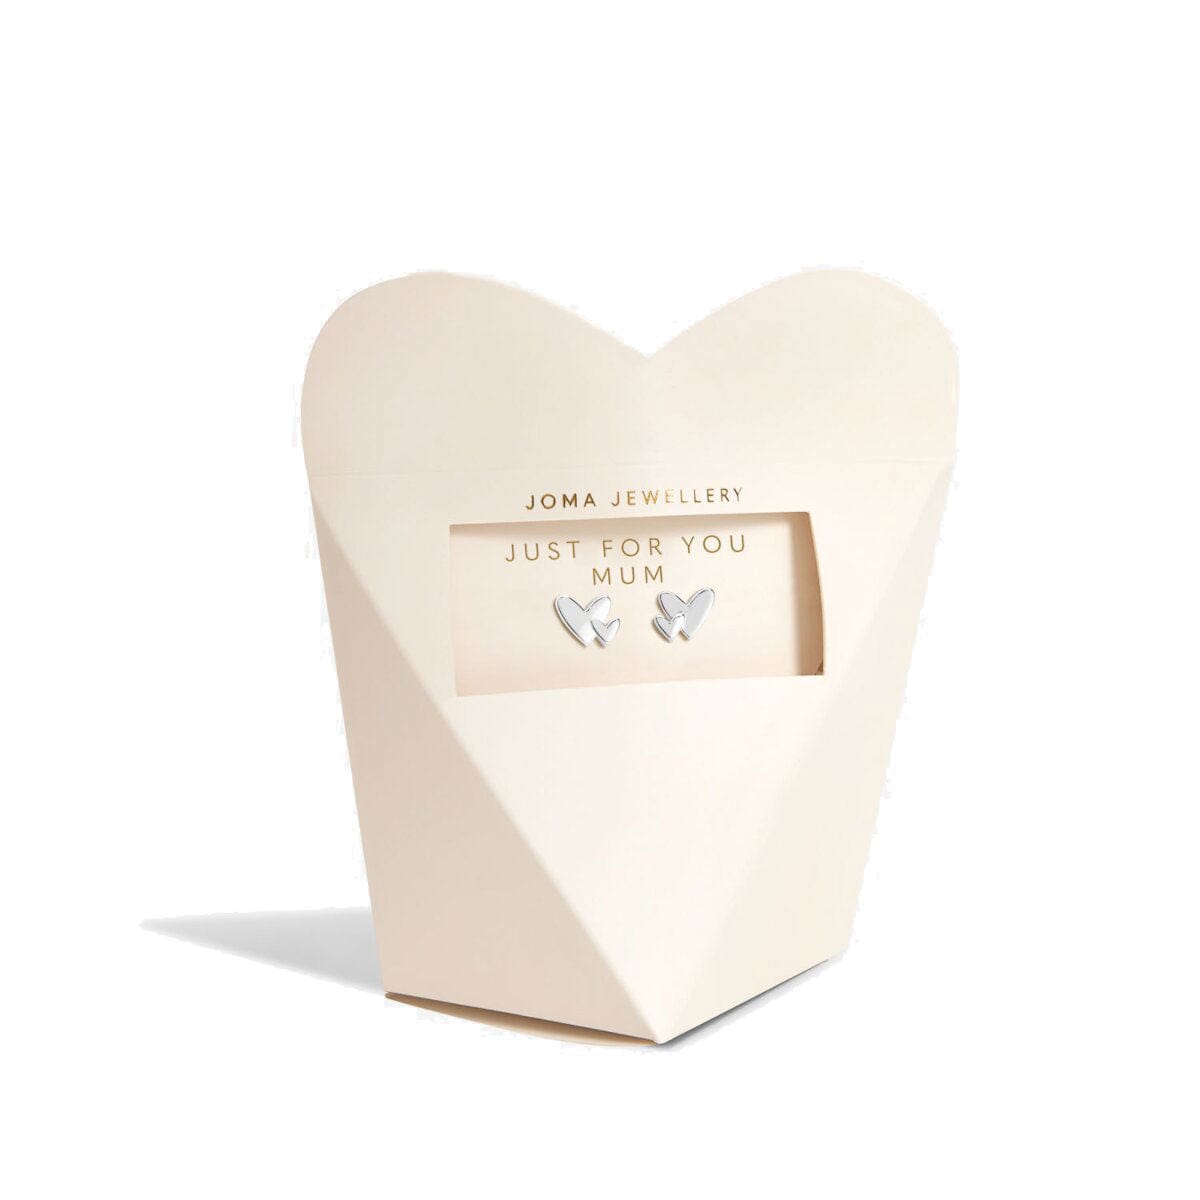 Joma Jewellery Boxed Earrings Joma Jewellery 'Just For You Mum' From The Heart Earrings Gift Box